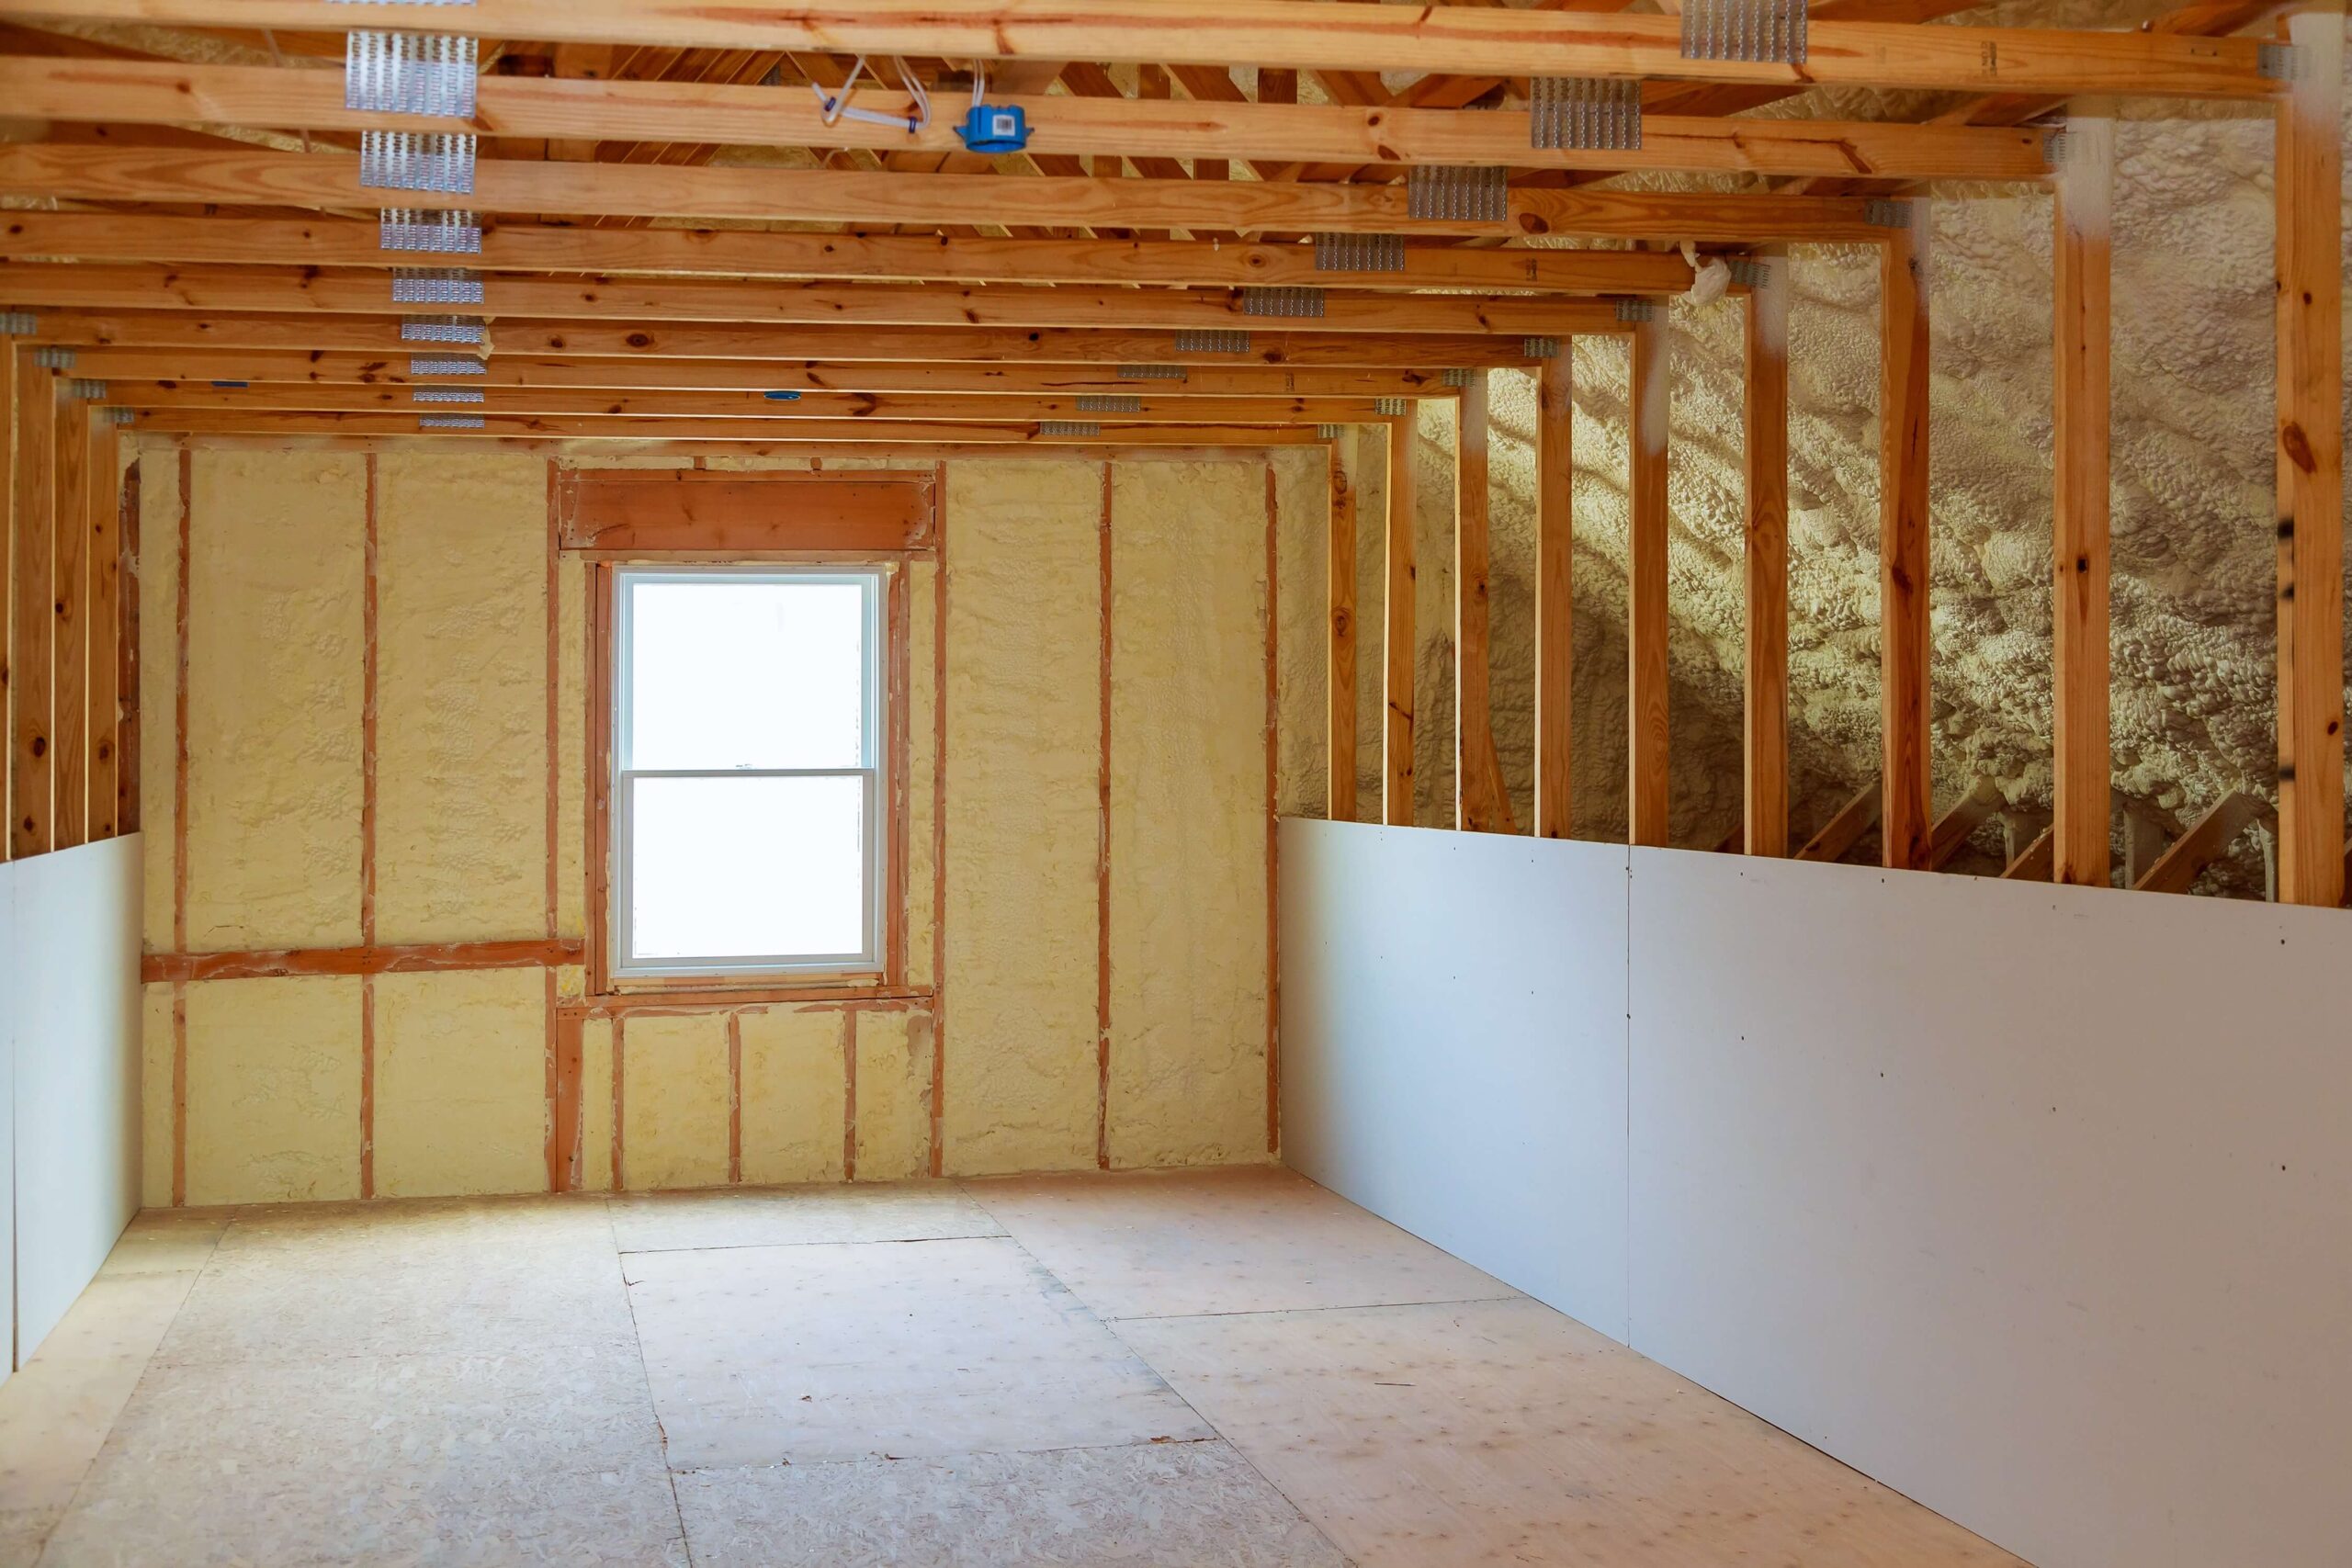 A room with wood framing and insulation.